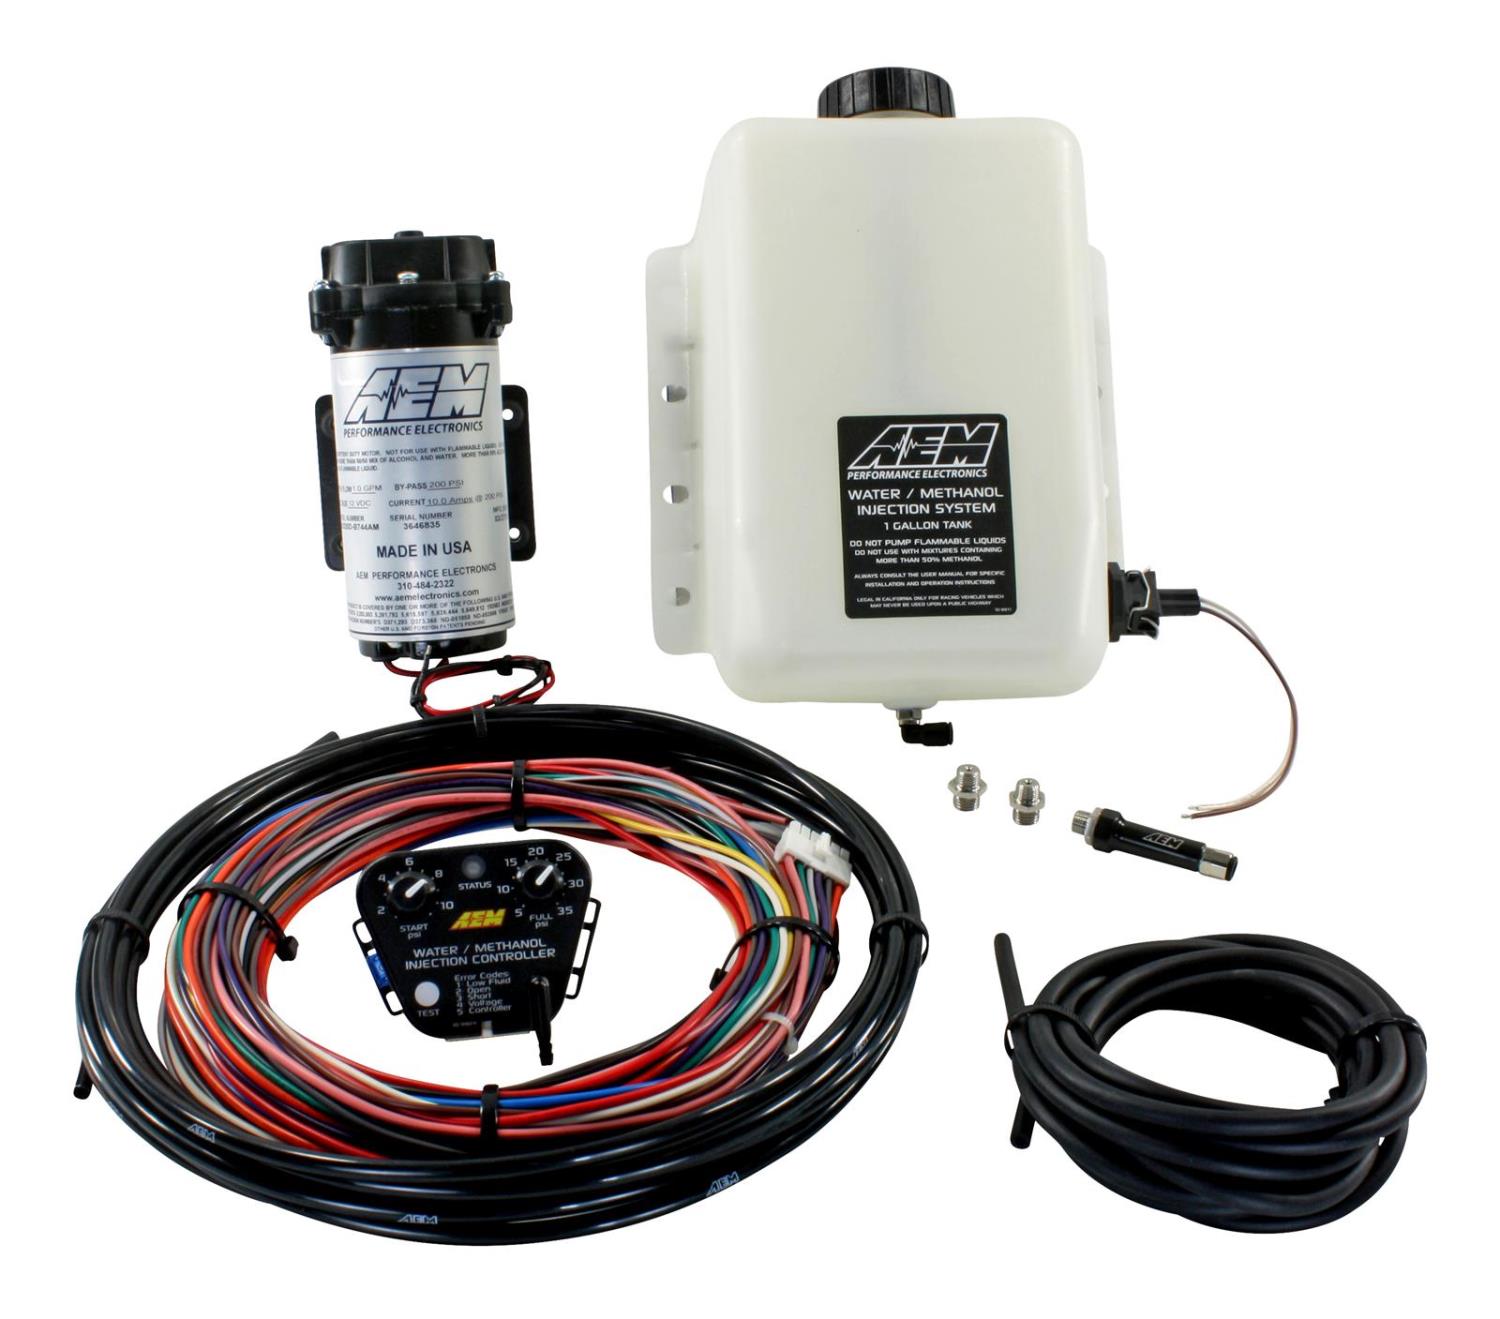 30-3300 V2 Water/Methanol Injection Kit Includes: Standard Controller For Internal MAP With 35psi Max